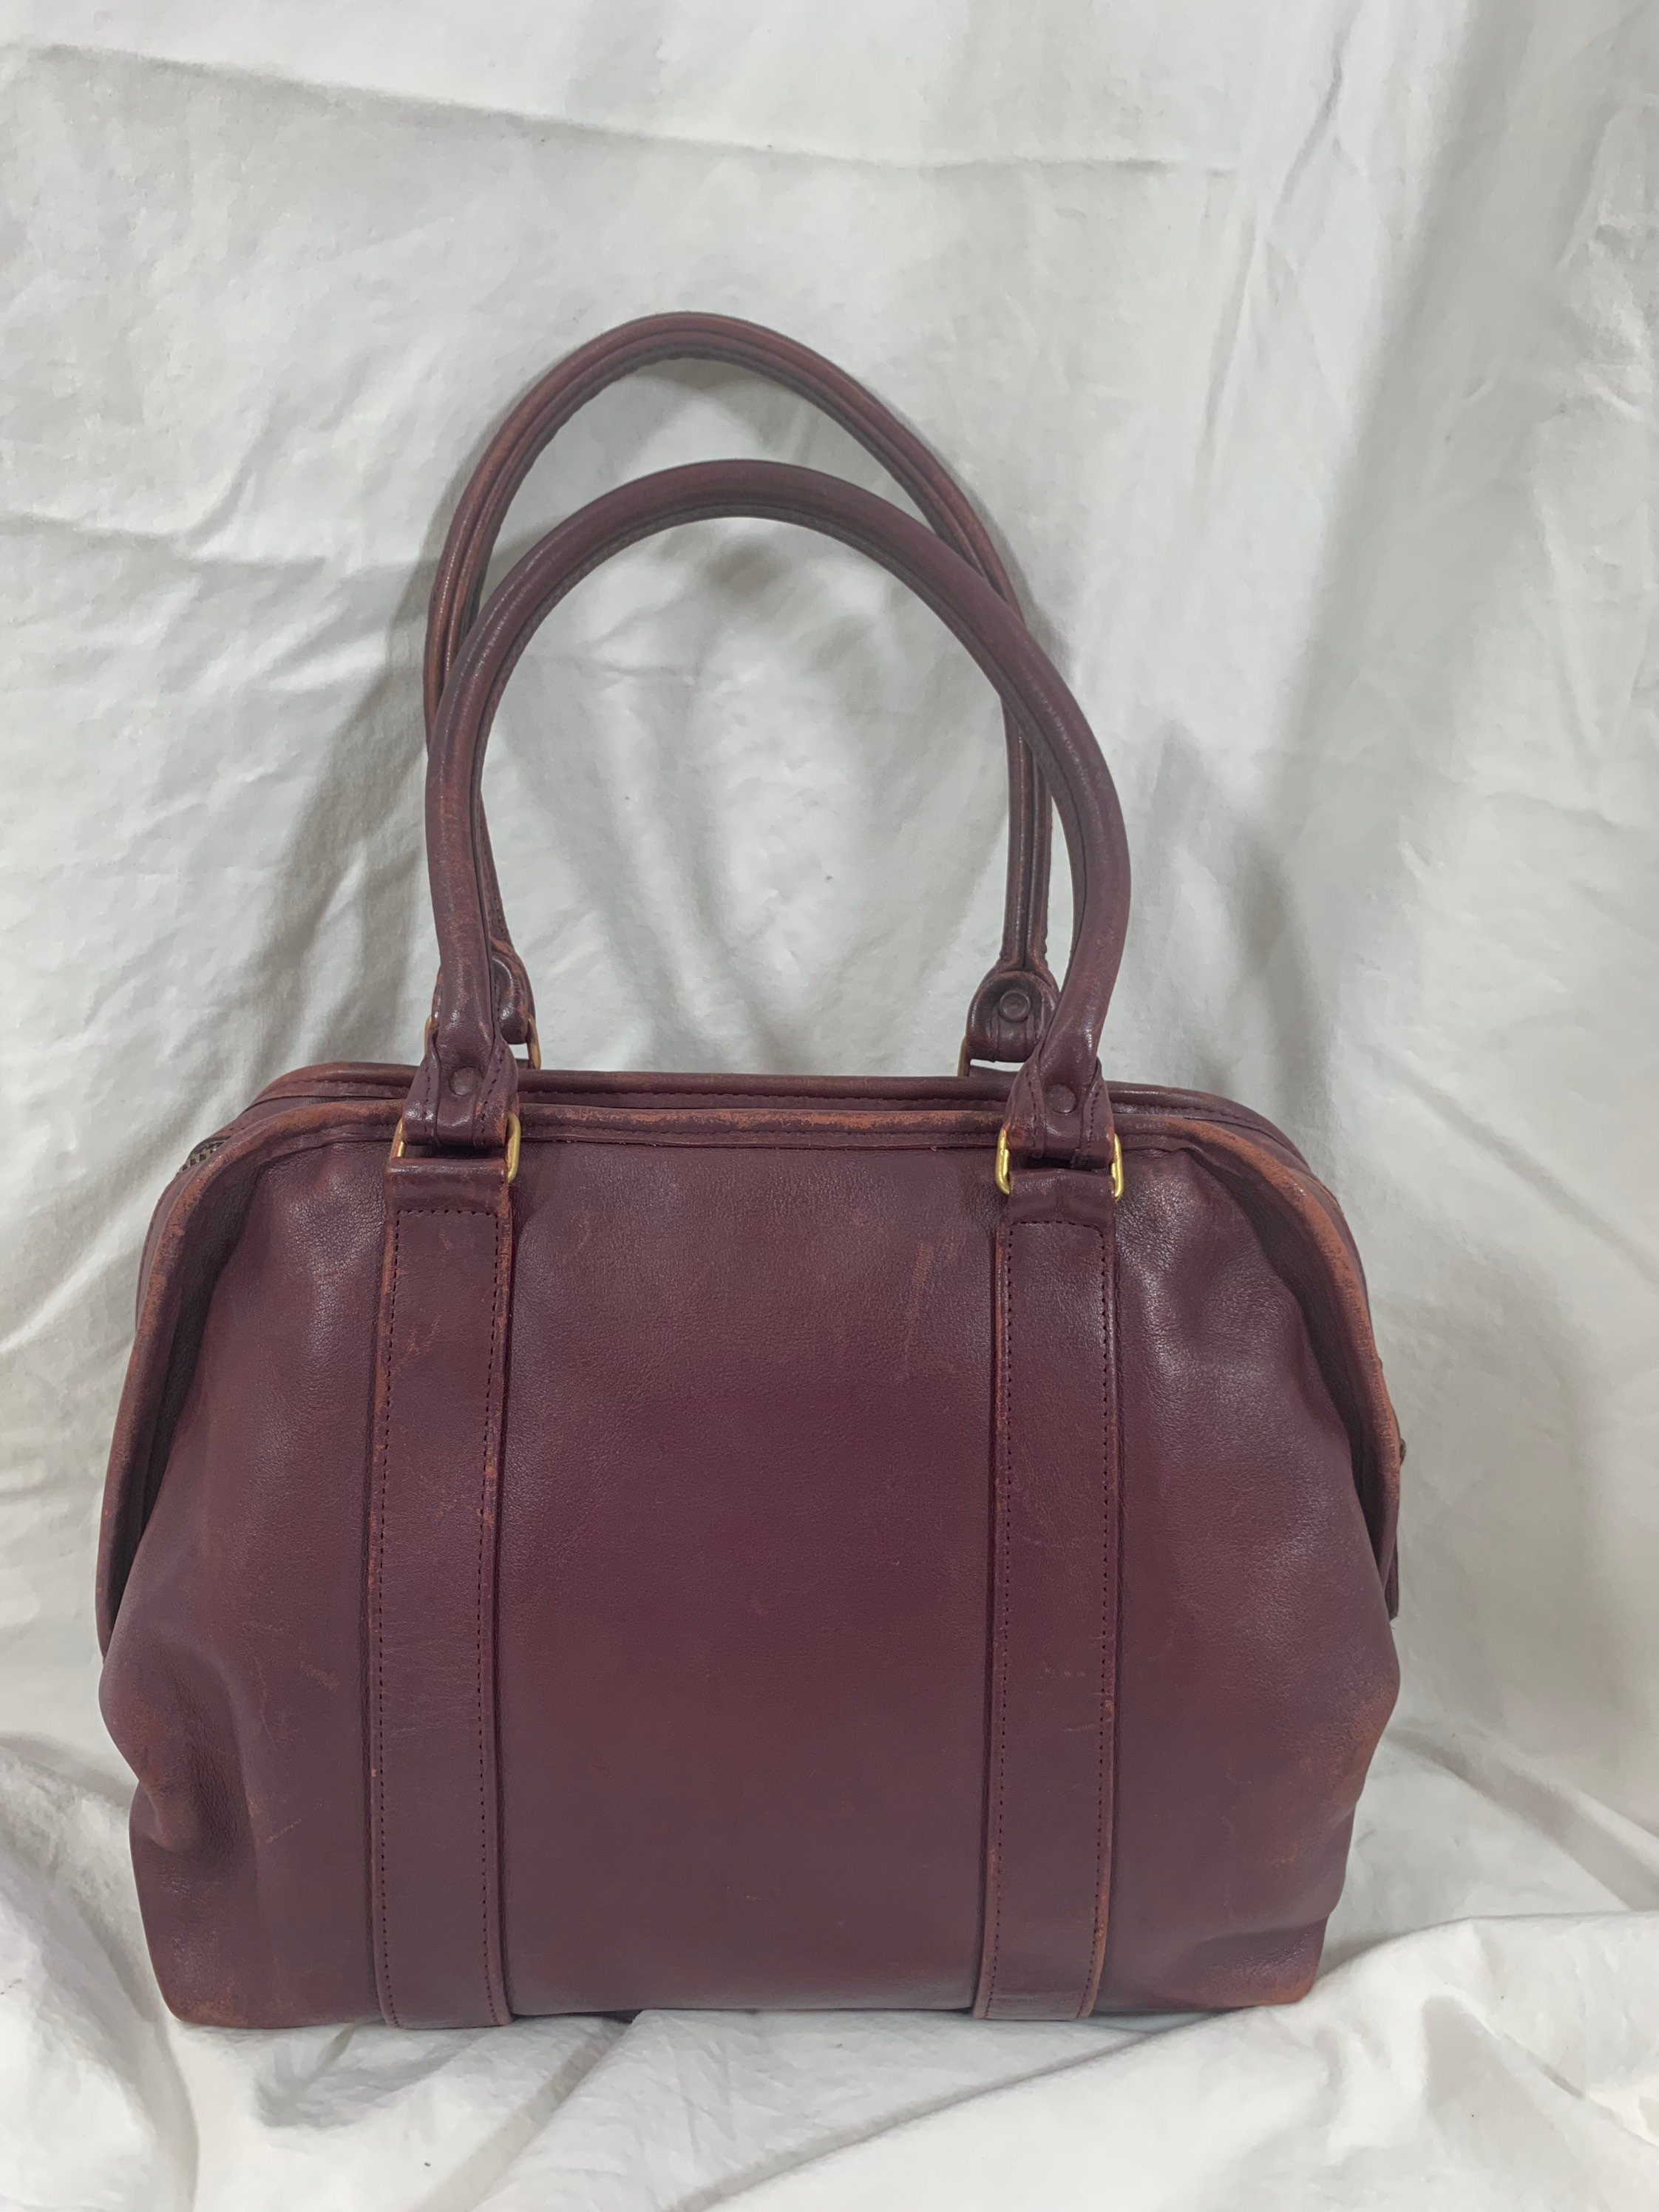 Coach Vintage Brown Soft Leather Satchel Doctors Bag Made in USA 8x7x12  - $115 - From Kathleen